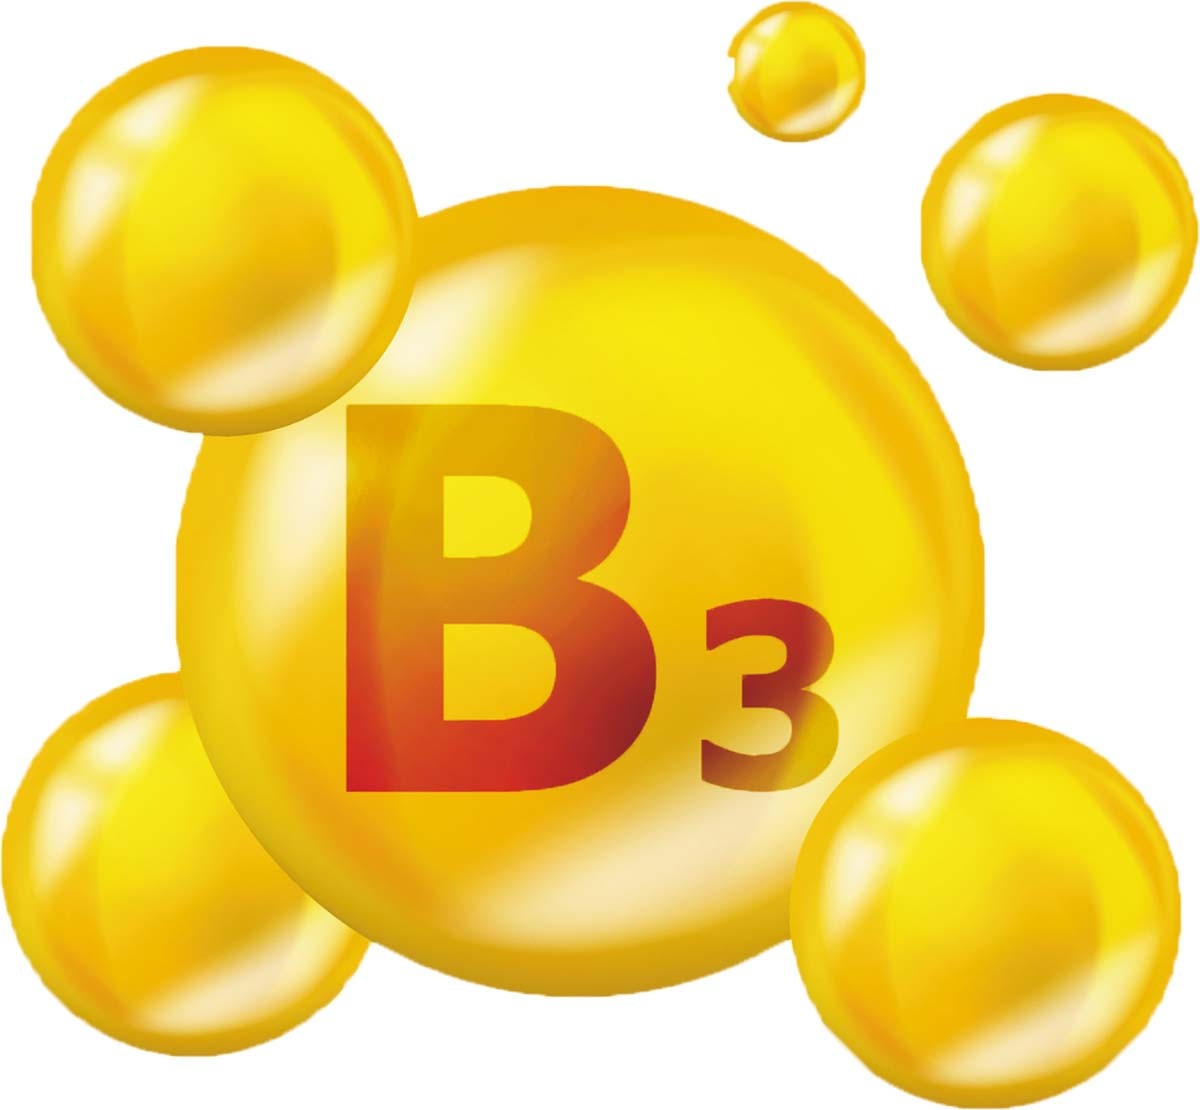 illustration of yellow spheres in a cluster with B3 written on the largest one, in the center